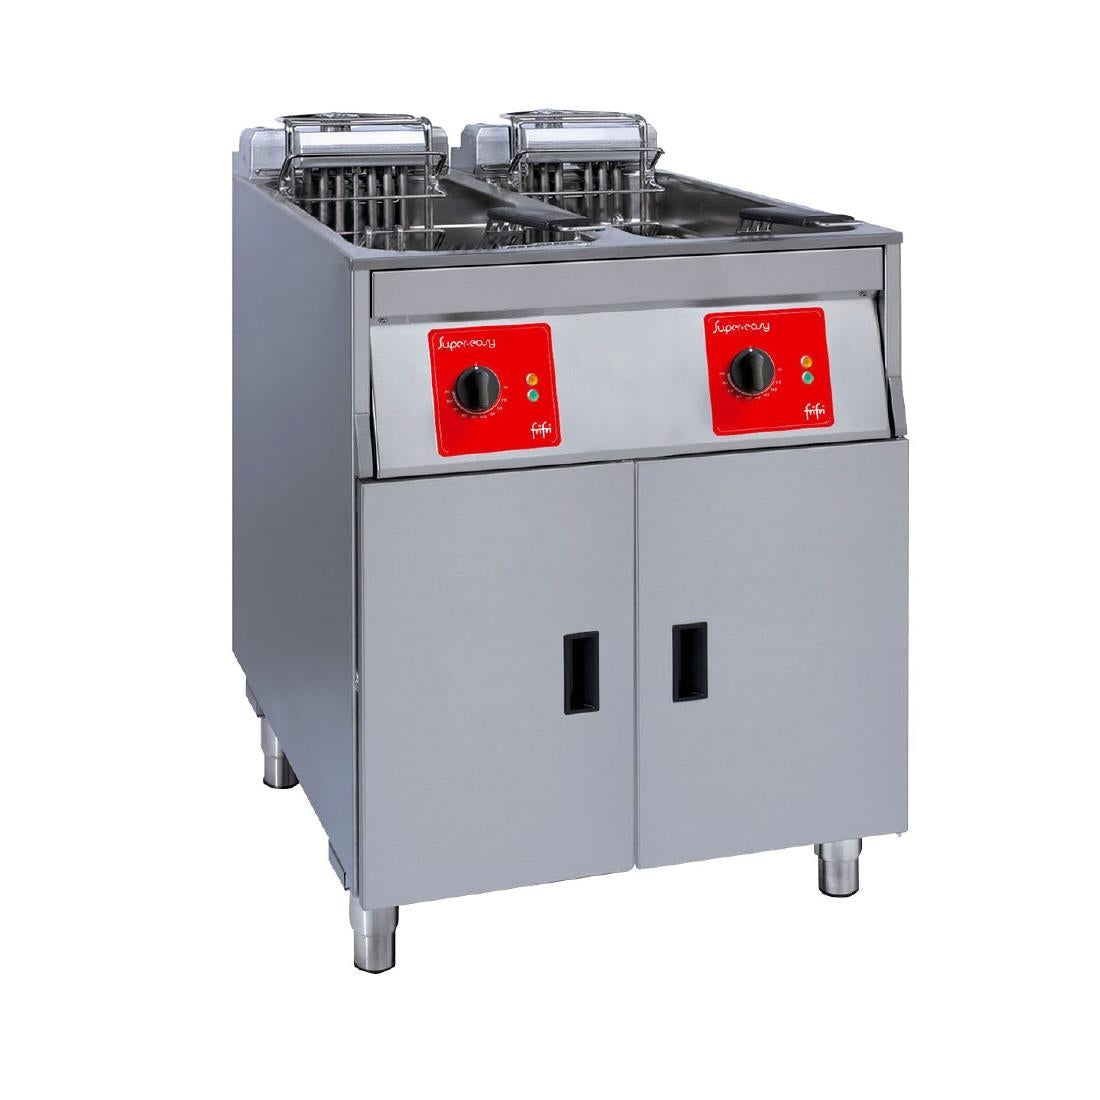 HS068-3PH FriFri Super Easy 622 Electric Free-standing Fryer Twin Tank Twin Baskets with Filtration 2x11.4kW Three Phase SL622L32G0